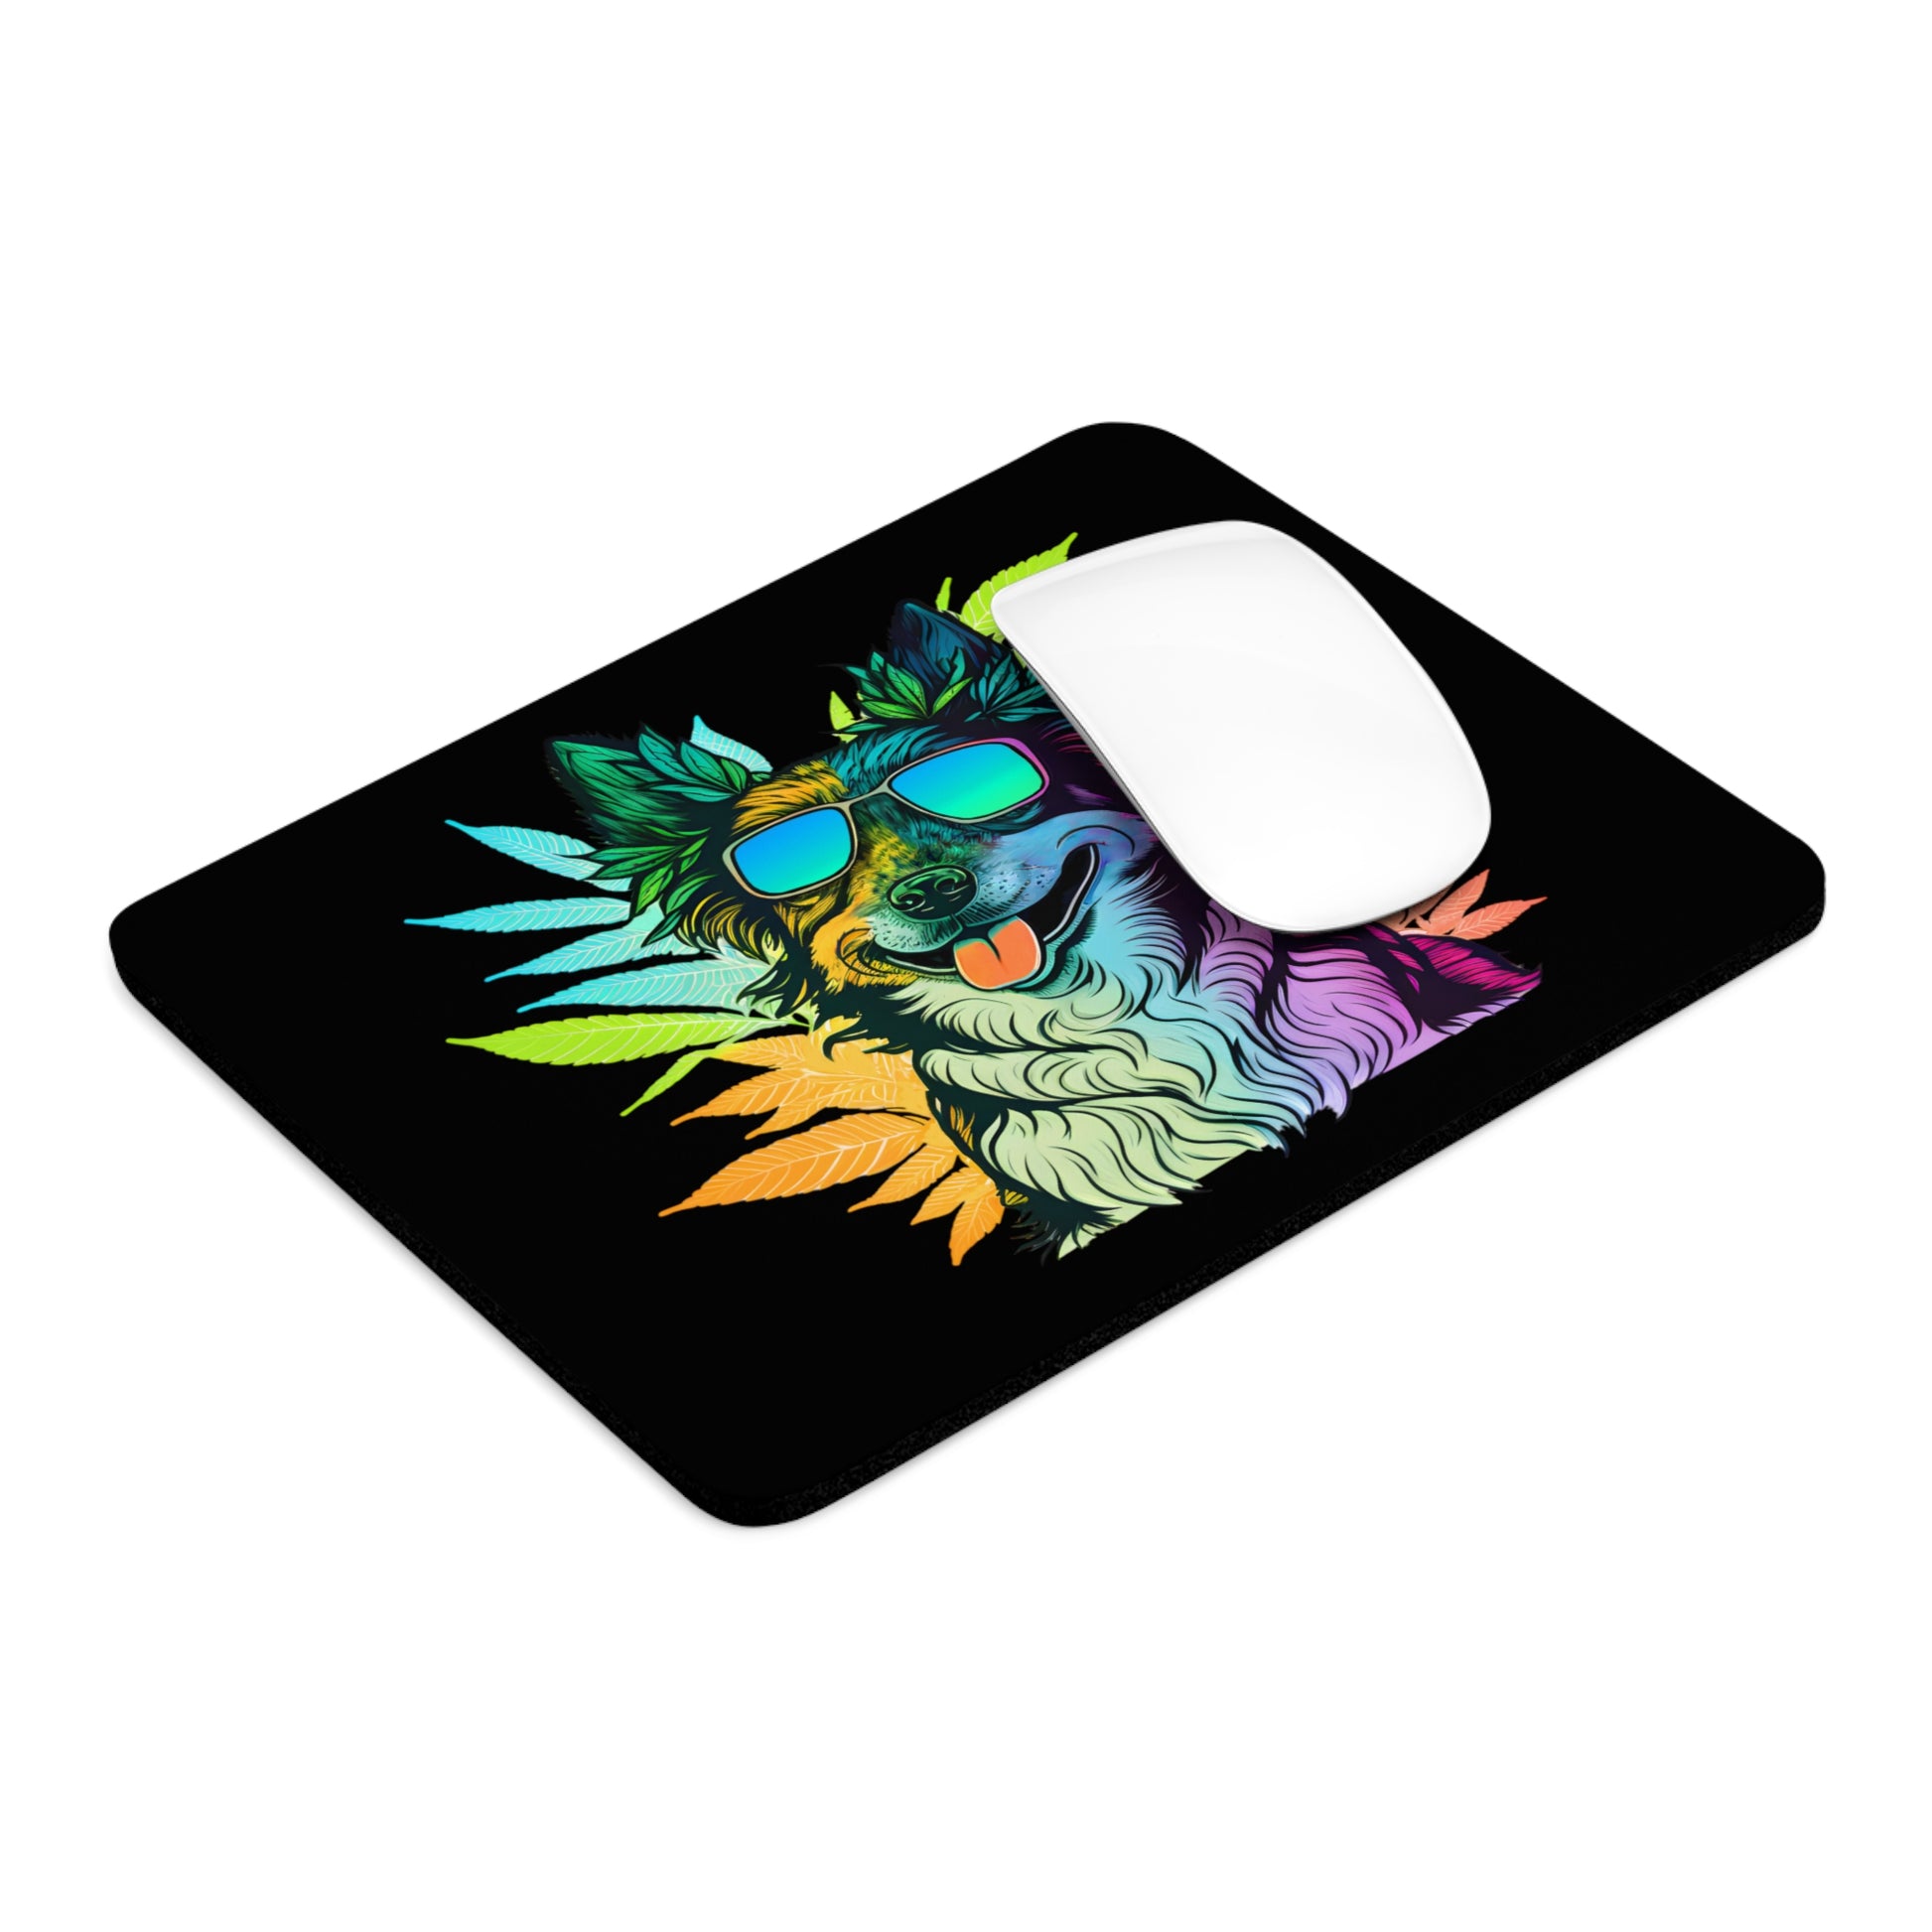 The square Cannabis Border Collie Mouse Pad positioned to show the cool multi colored design with white mouse to give you the complete look.